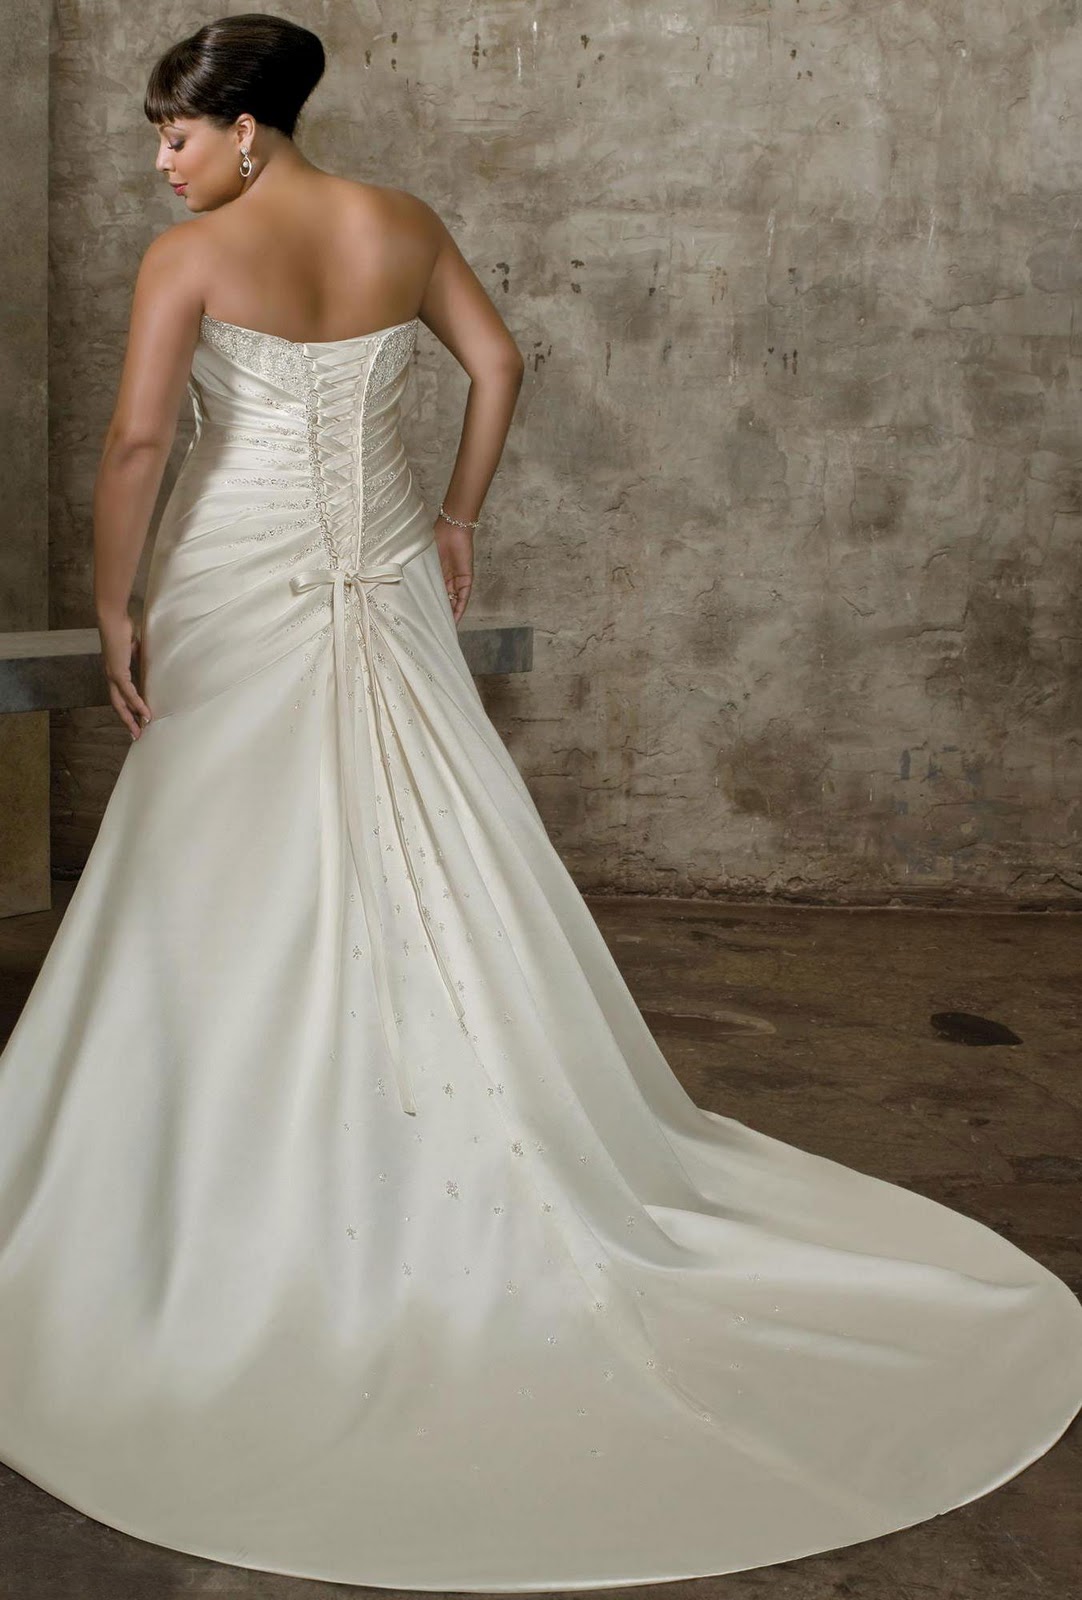 strapless sweetheart beach wedding dresses Posted by Dalia Sidow at 8:12 AM